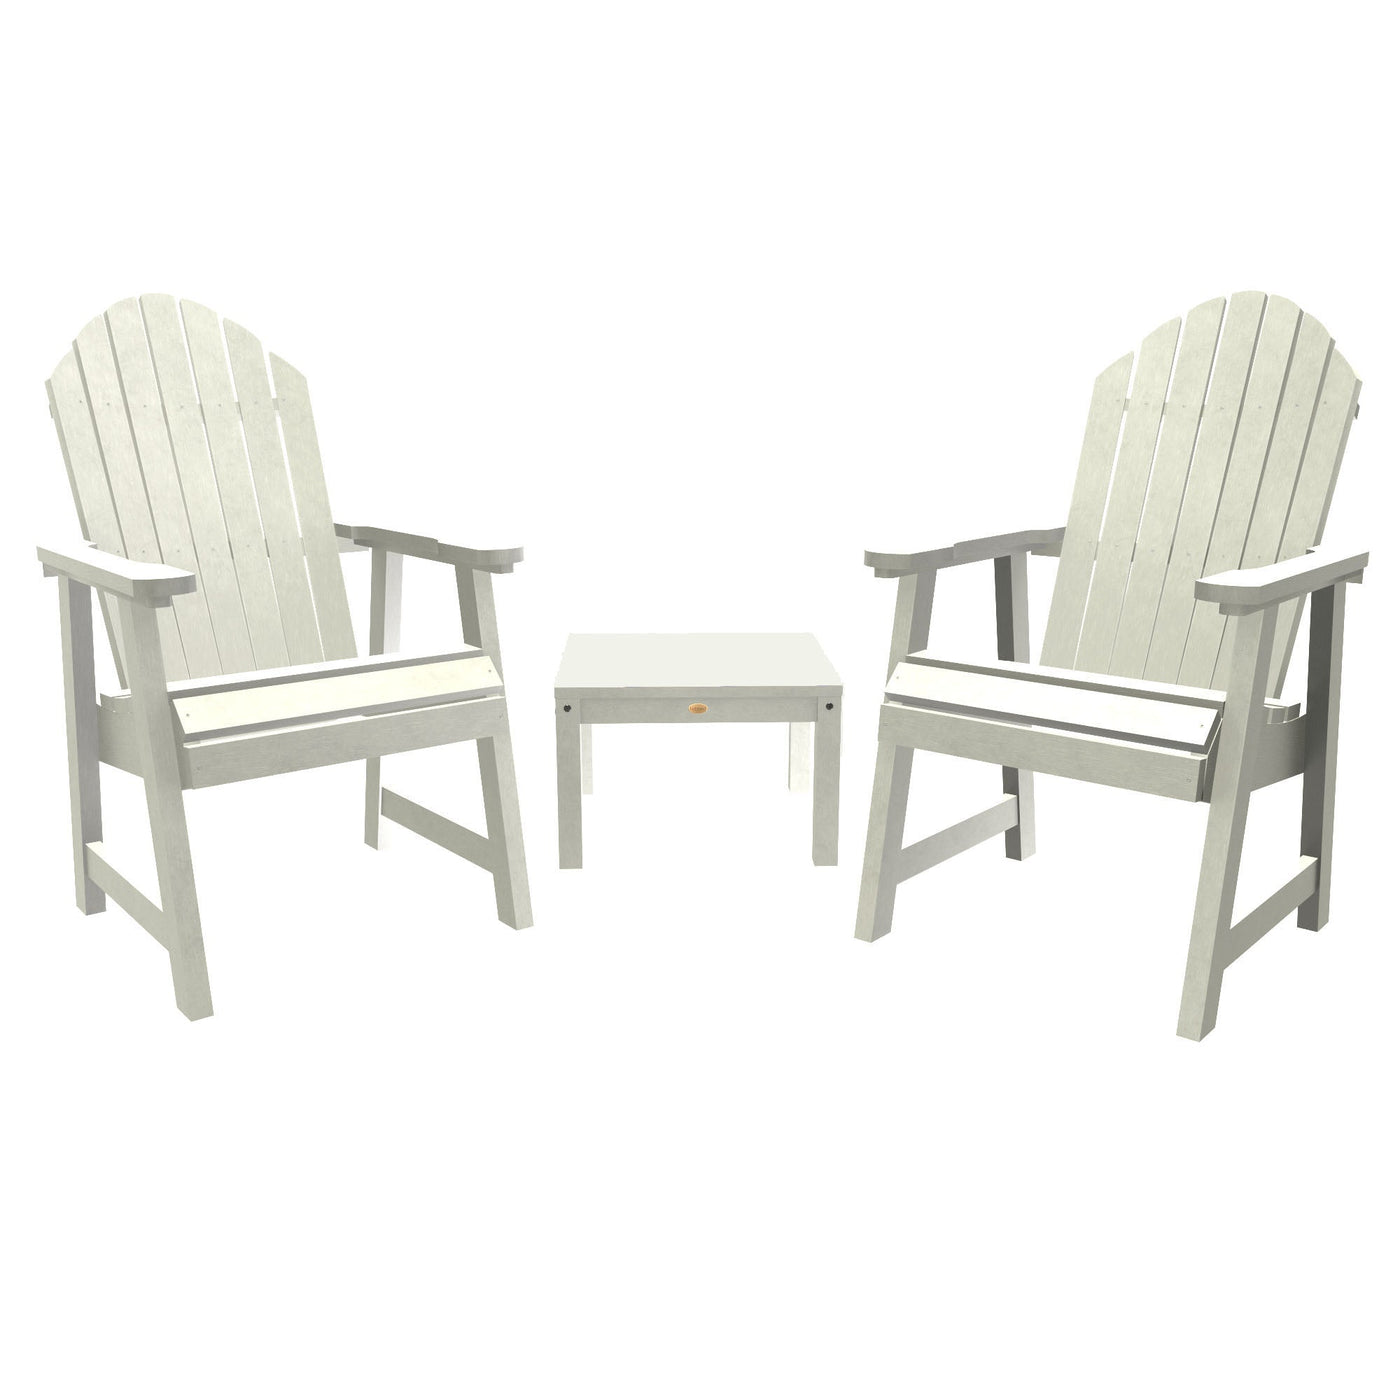 2 Hamilton Deck Chairs with Adirondack Side Table Highwood USA White 